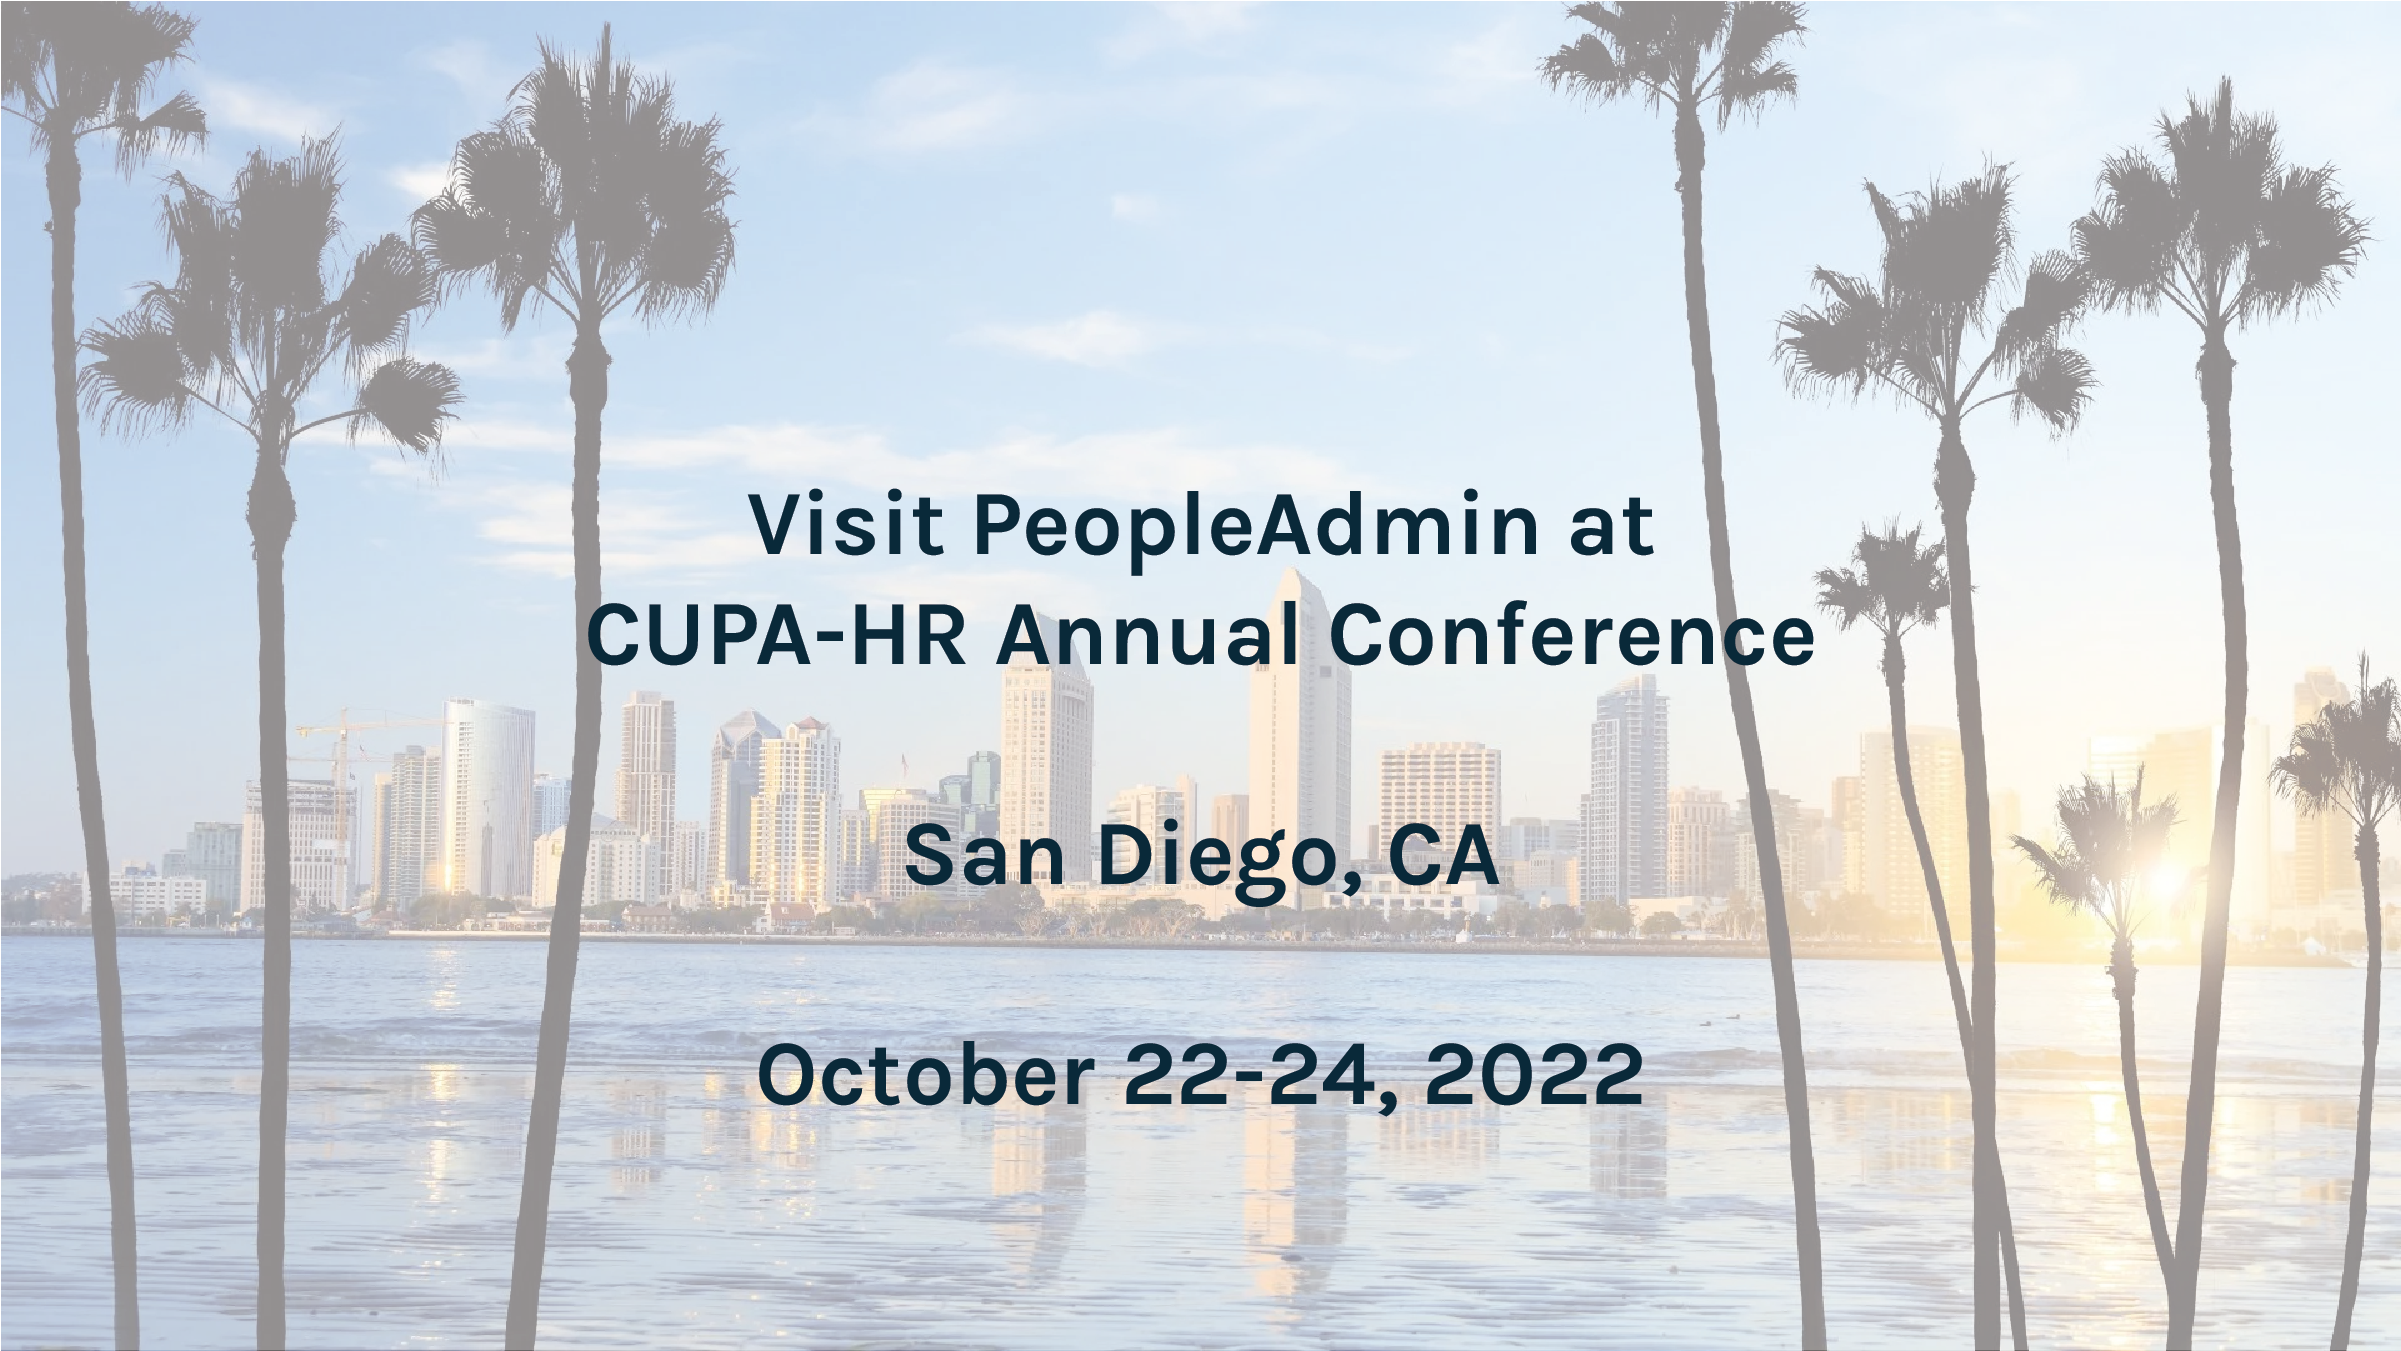 Visit PeopleAdmin at CUPA-HR annual conference